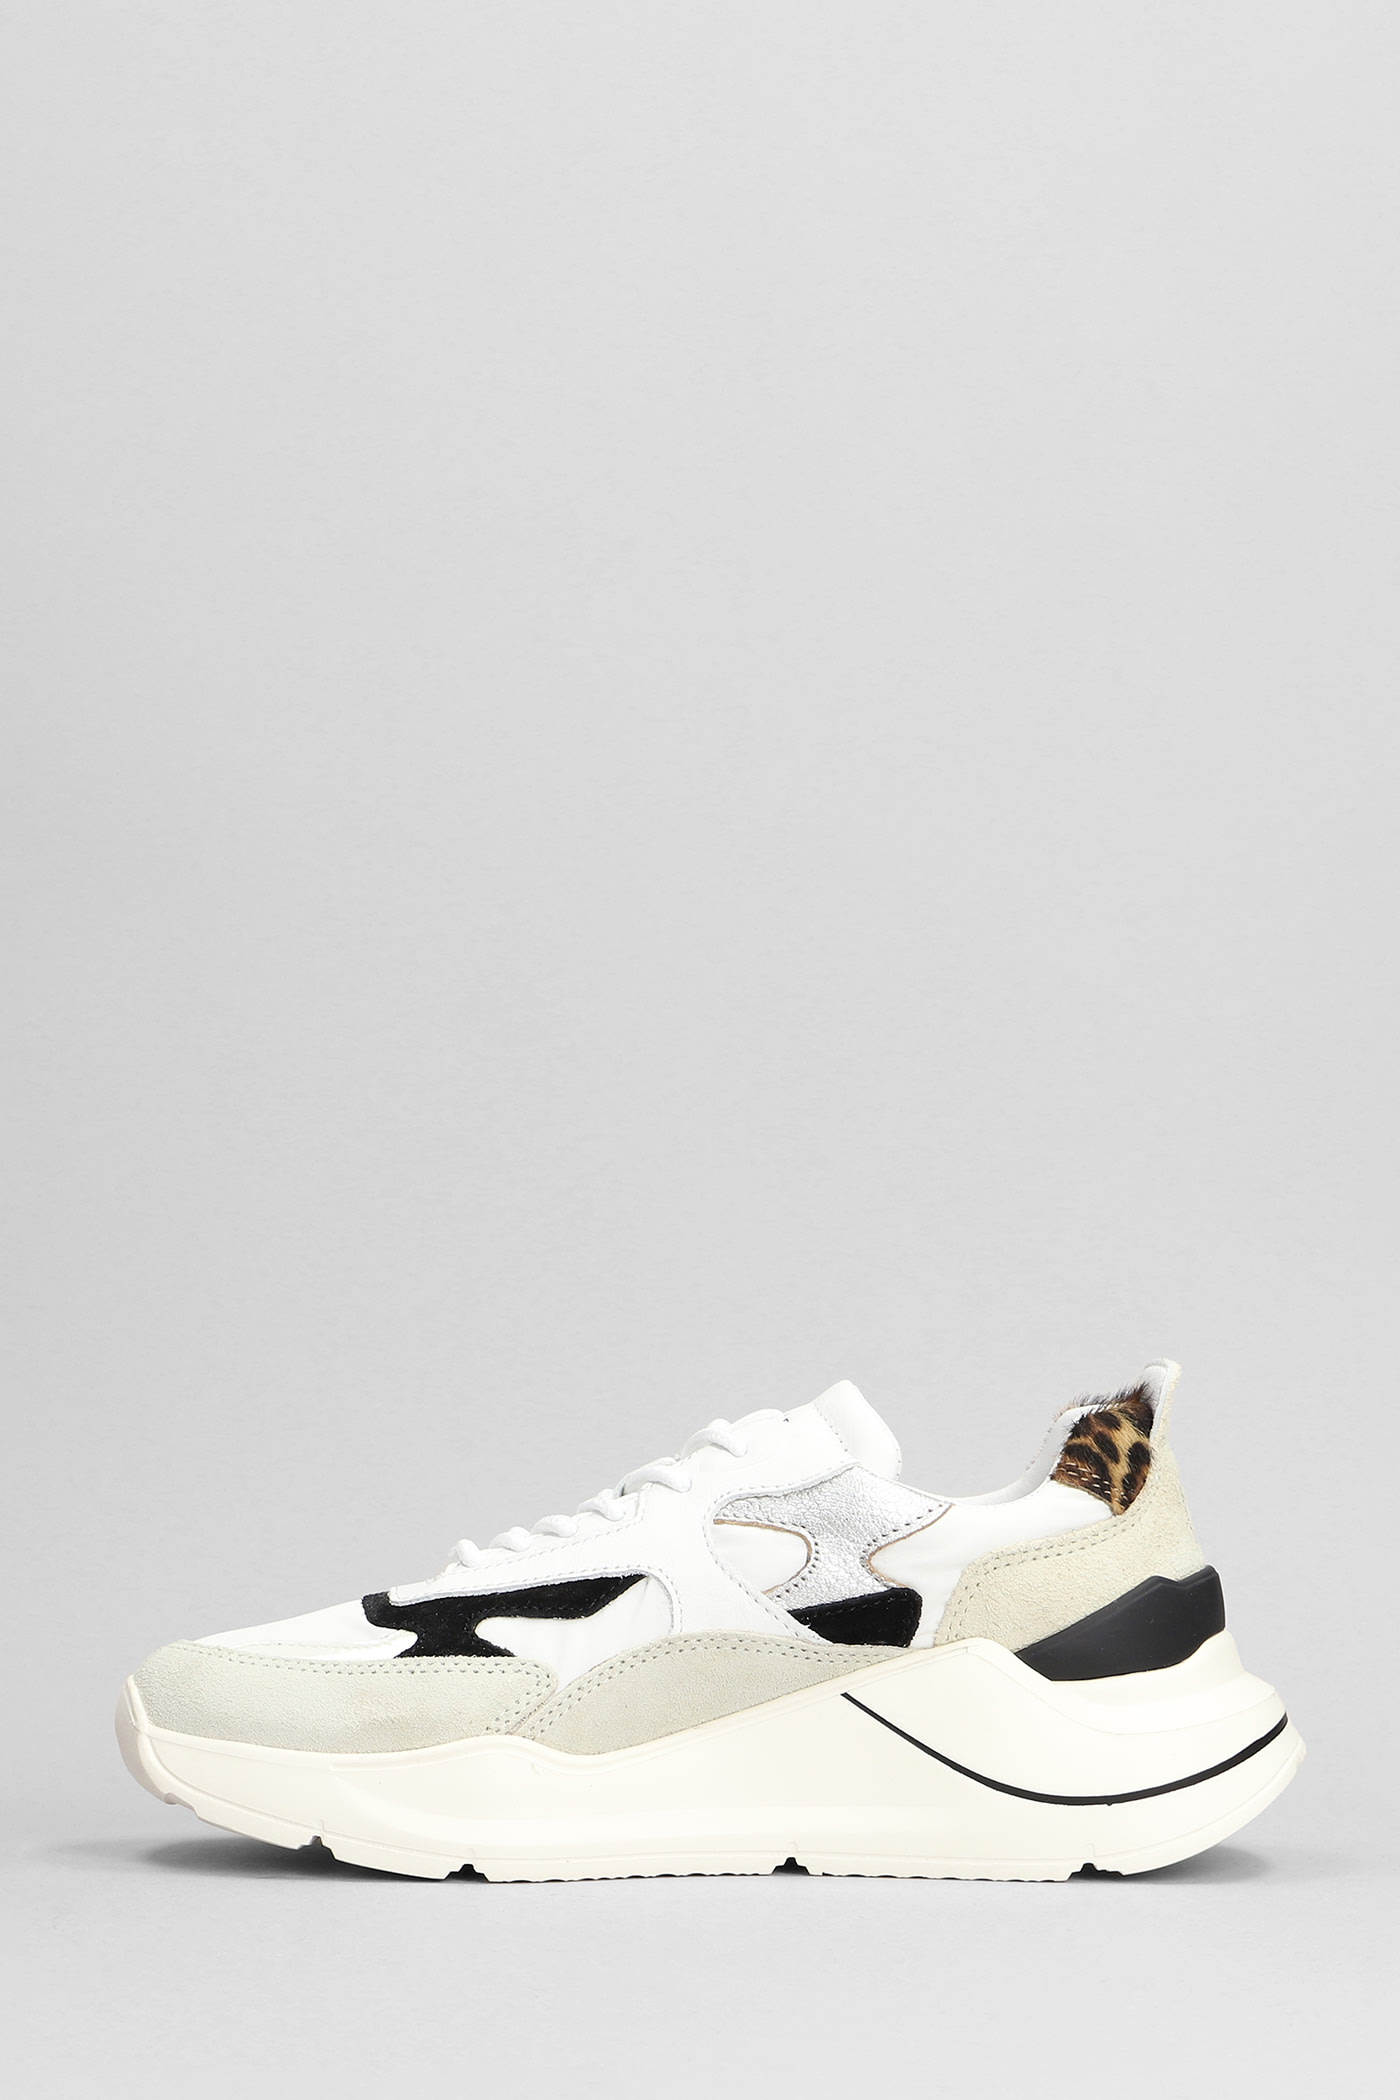 D.A.T.E. Fuga Sneakers In White Suede And Fabric